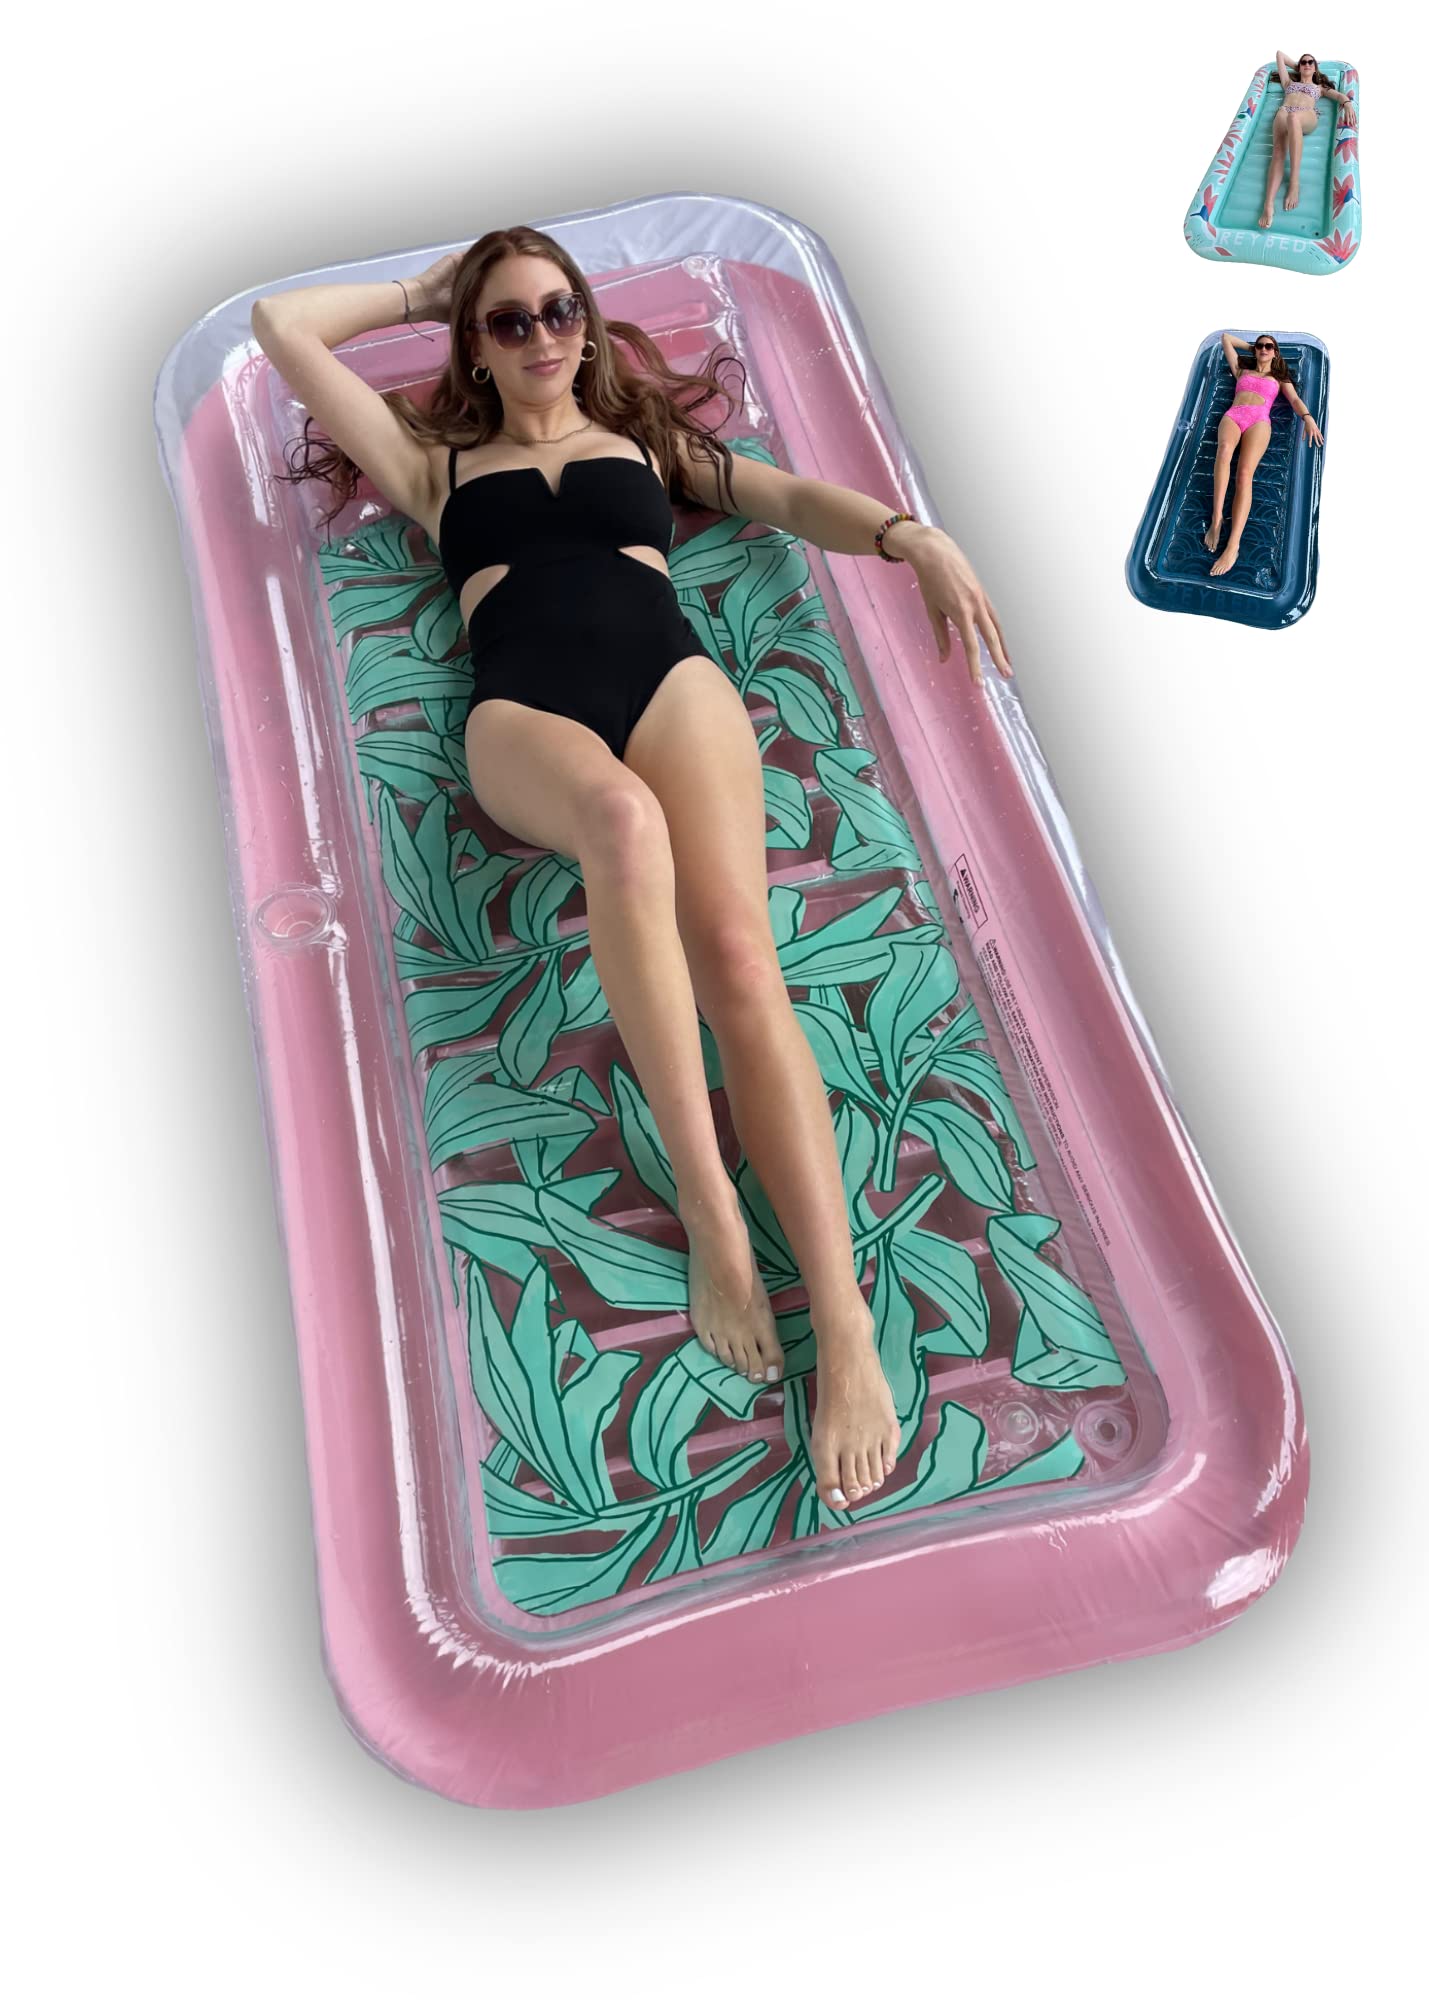 Inflatable Pools for Retirement Communities: Relaxation for Seniors